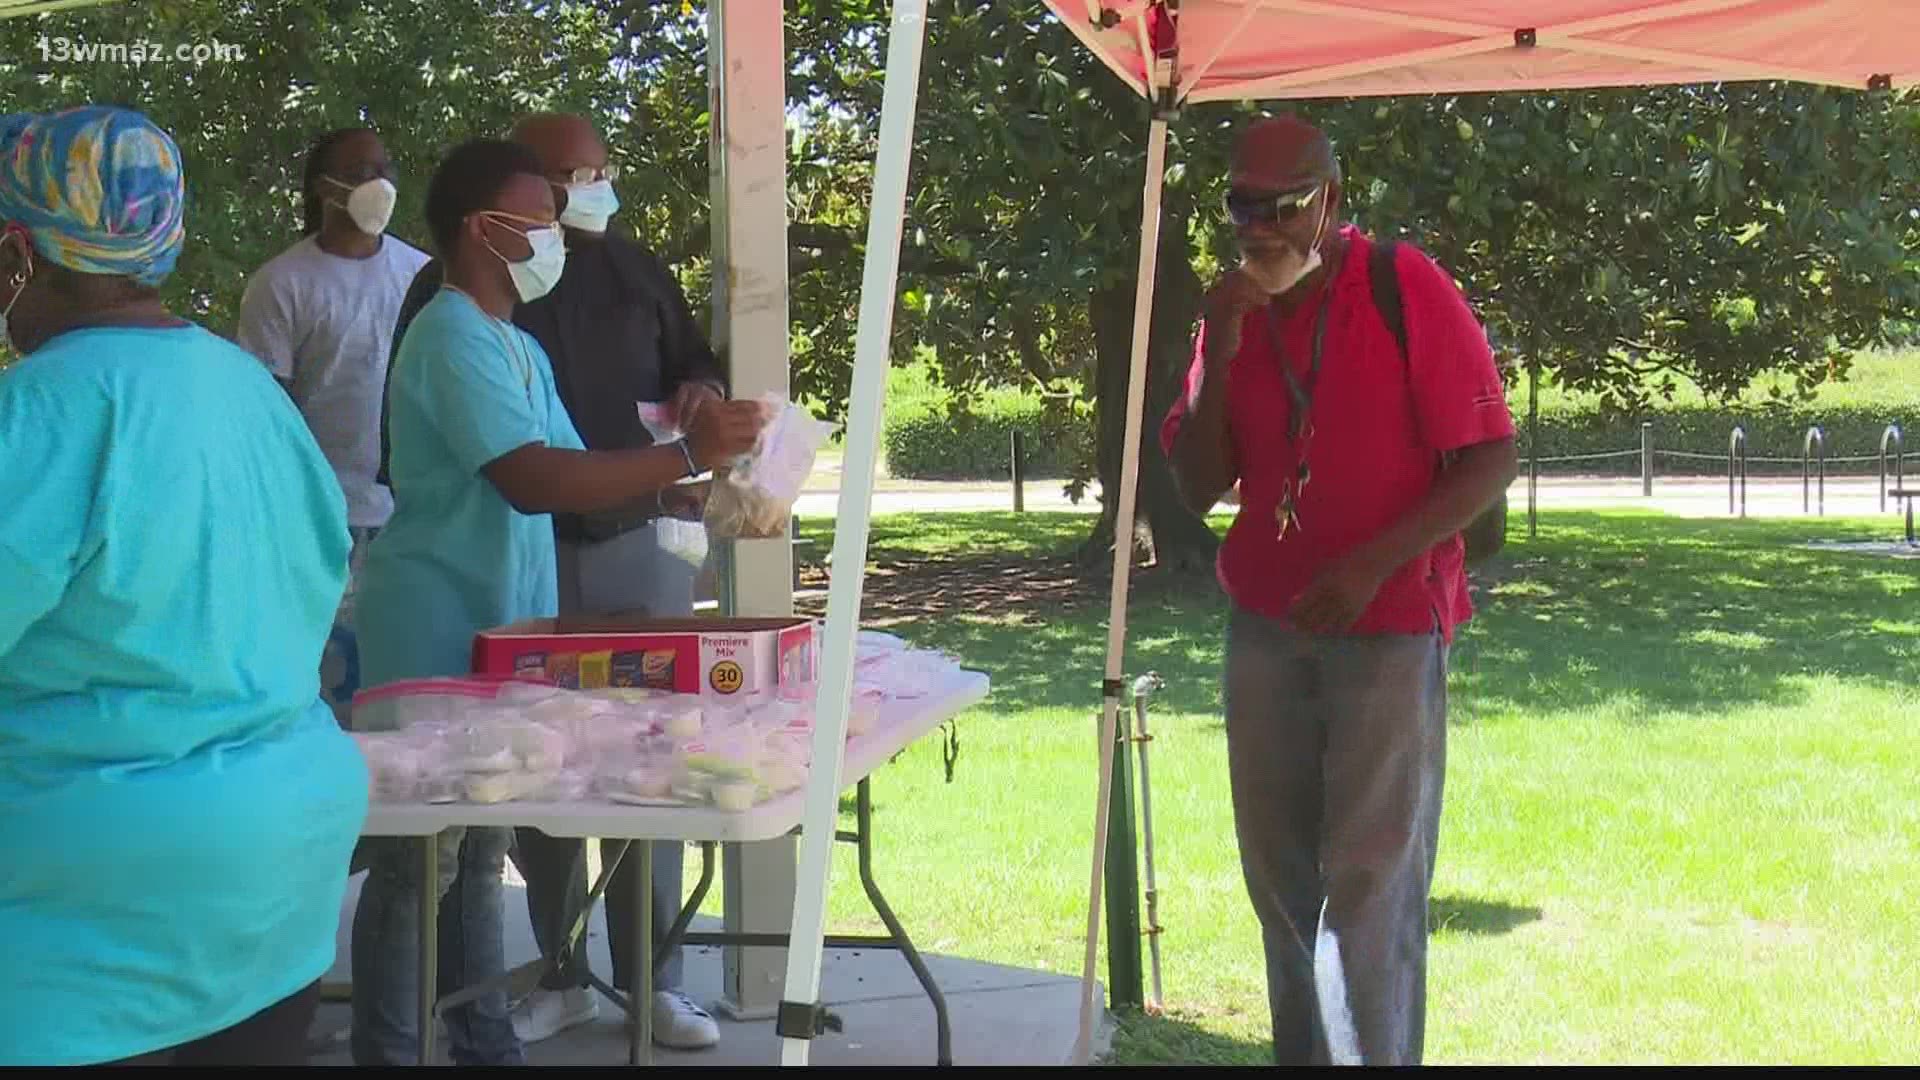 One Macon teen helped the homeless in Central City Park this Saturday.